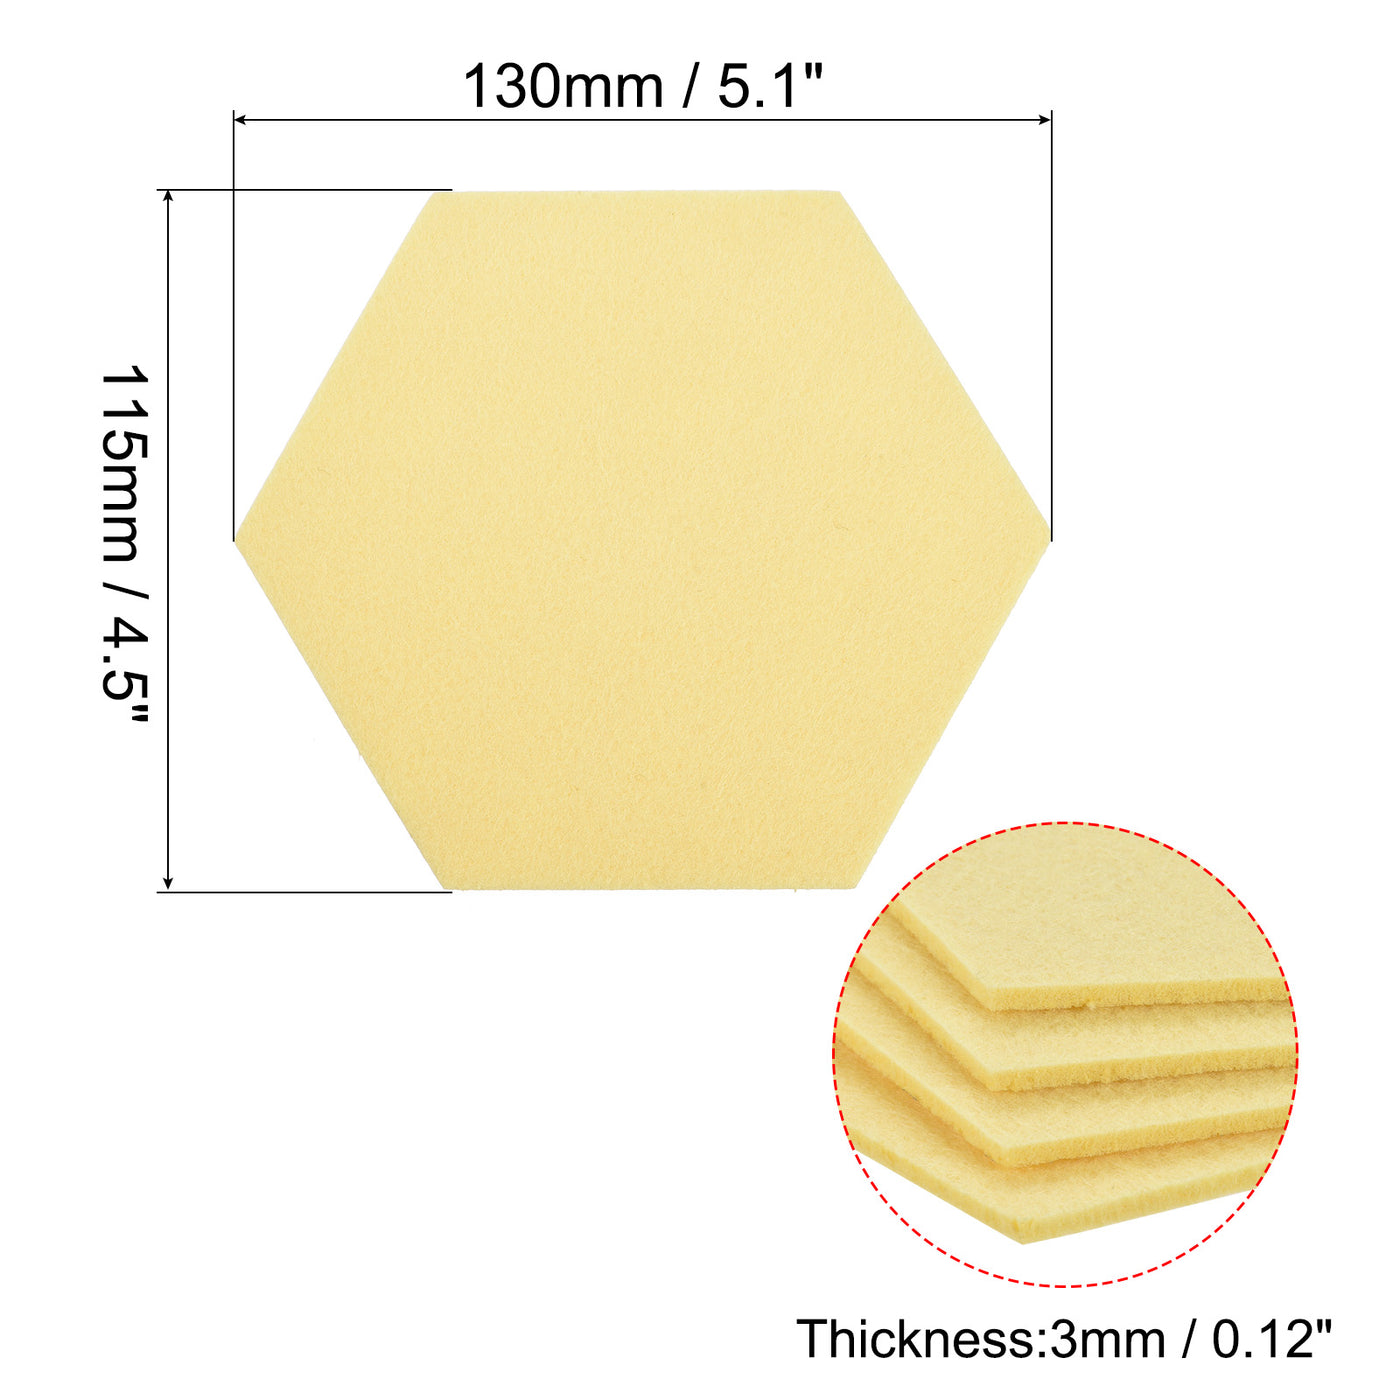 uxcell Uxcell Felt Coasters 9pcs Absorbent Pad Coaster for Drink Cup Pot Bowl Light Yellow